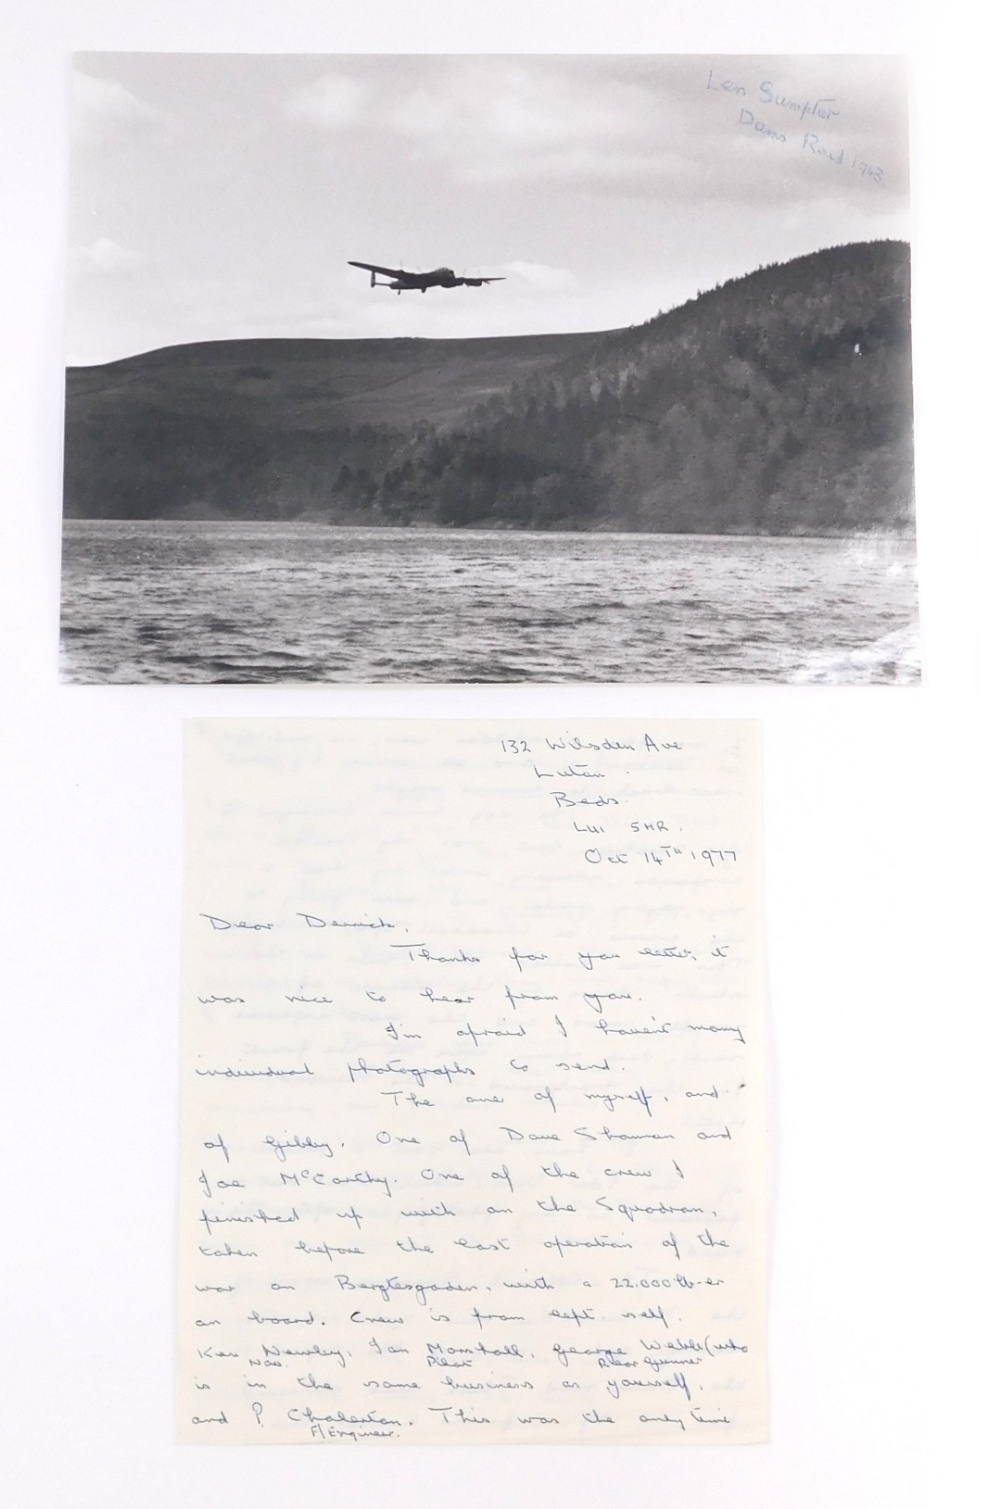 A photograph of the Lancaster flying over the Derwent Dam, signed by Dambuster Len Sumpter, together